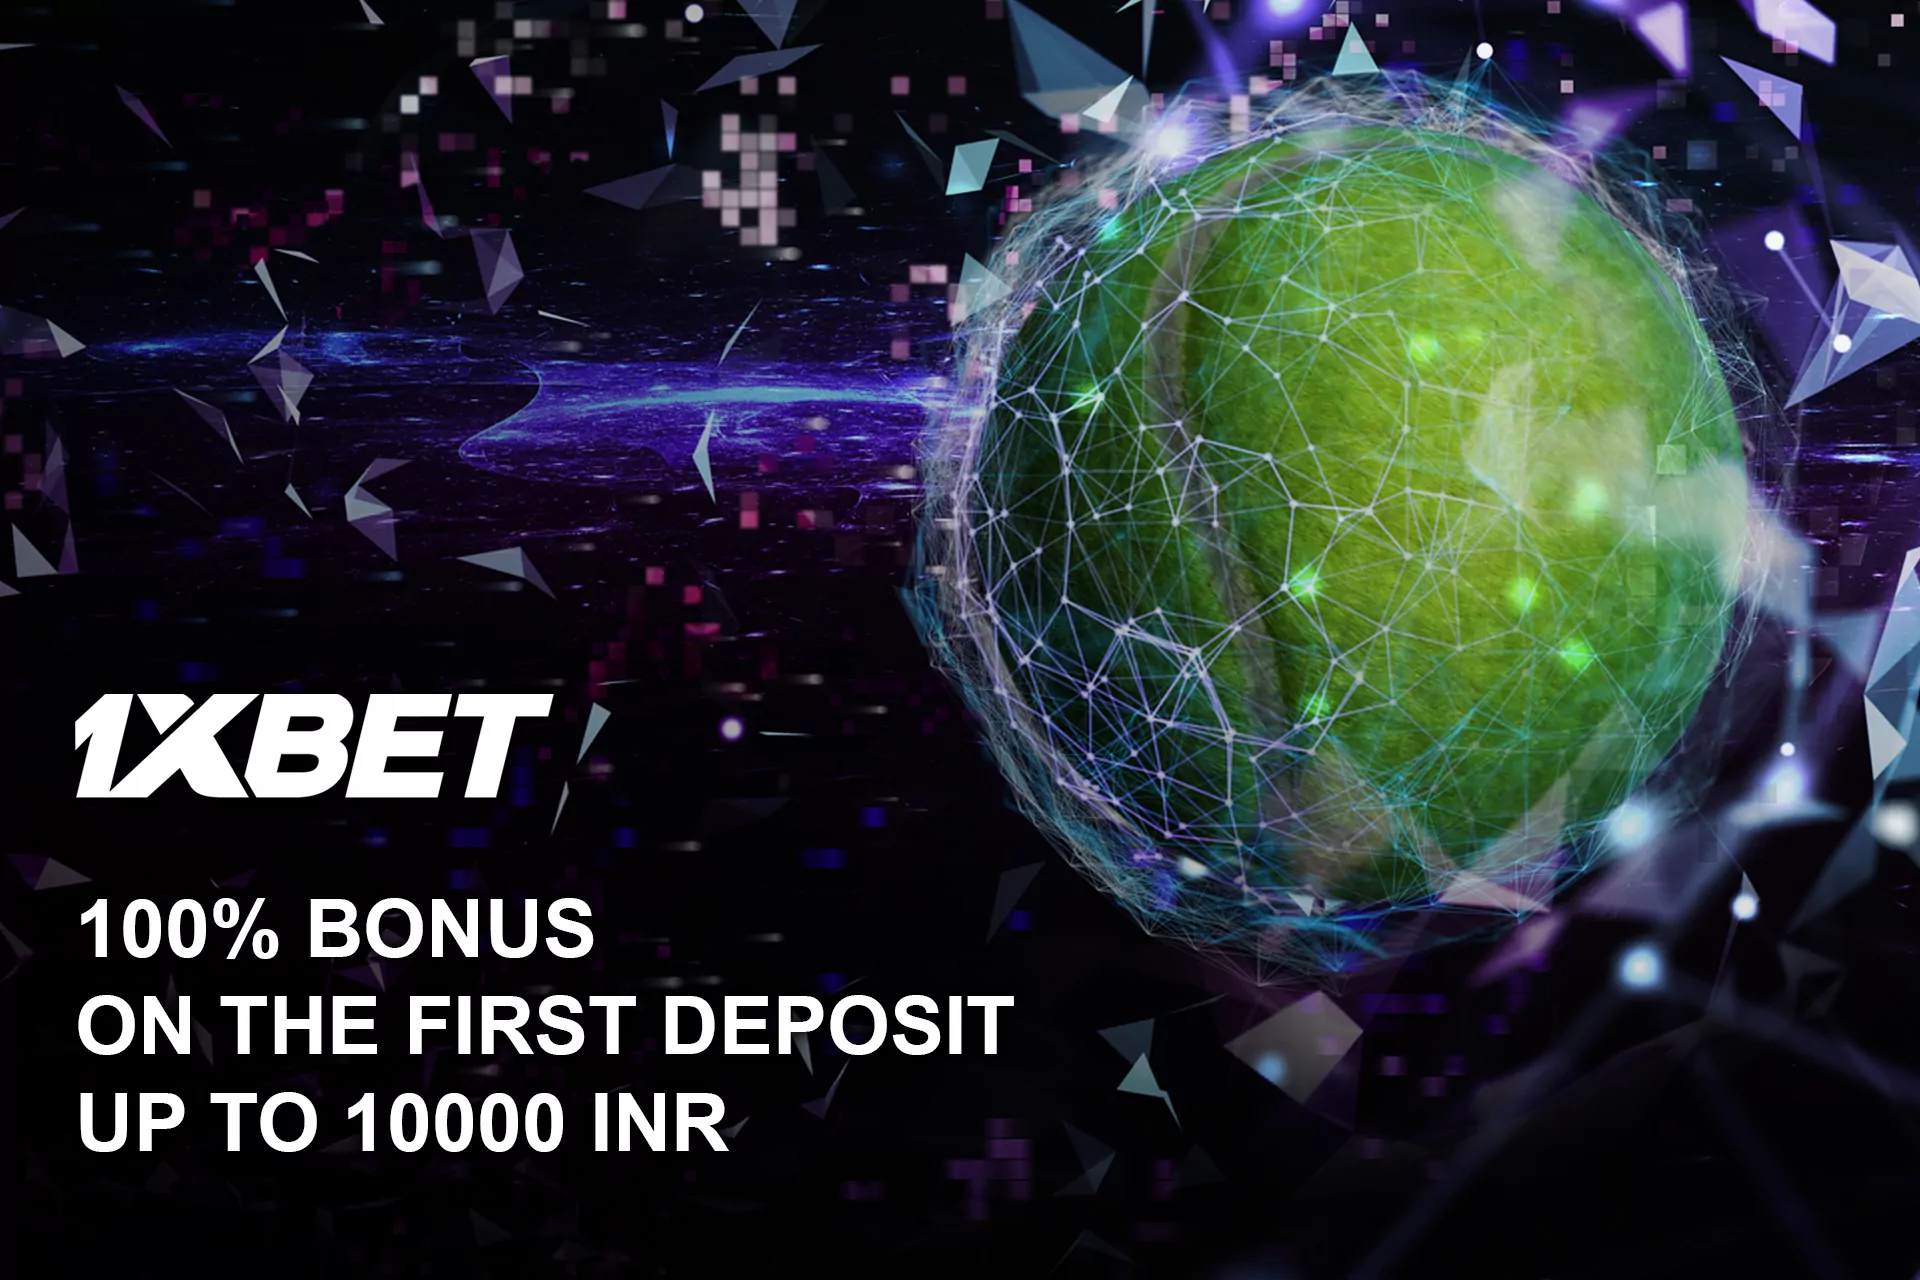 For new users, there is a welcome offer of a bonus on the first deposit at 1xBet.